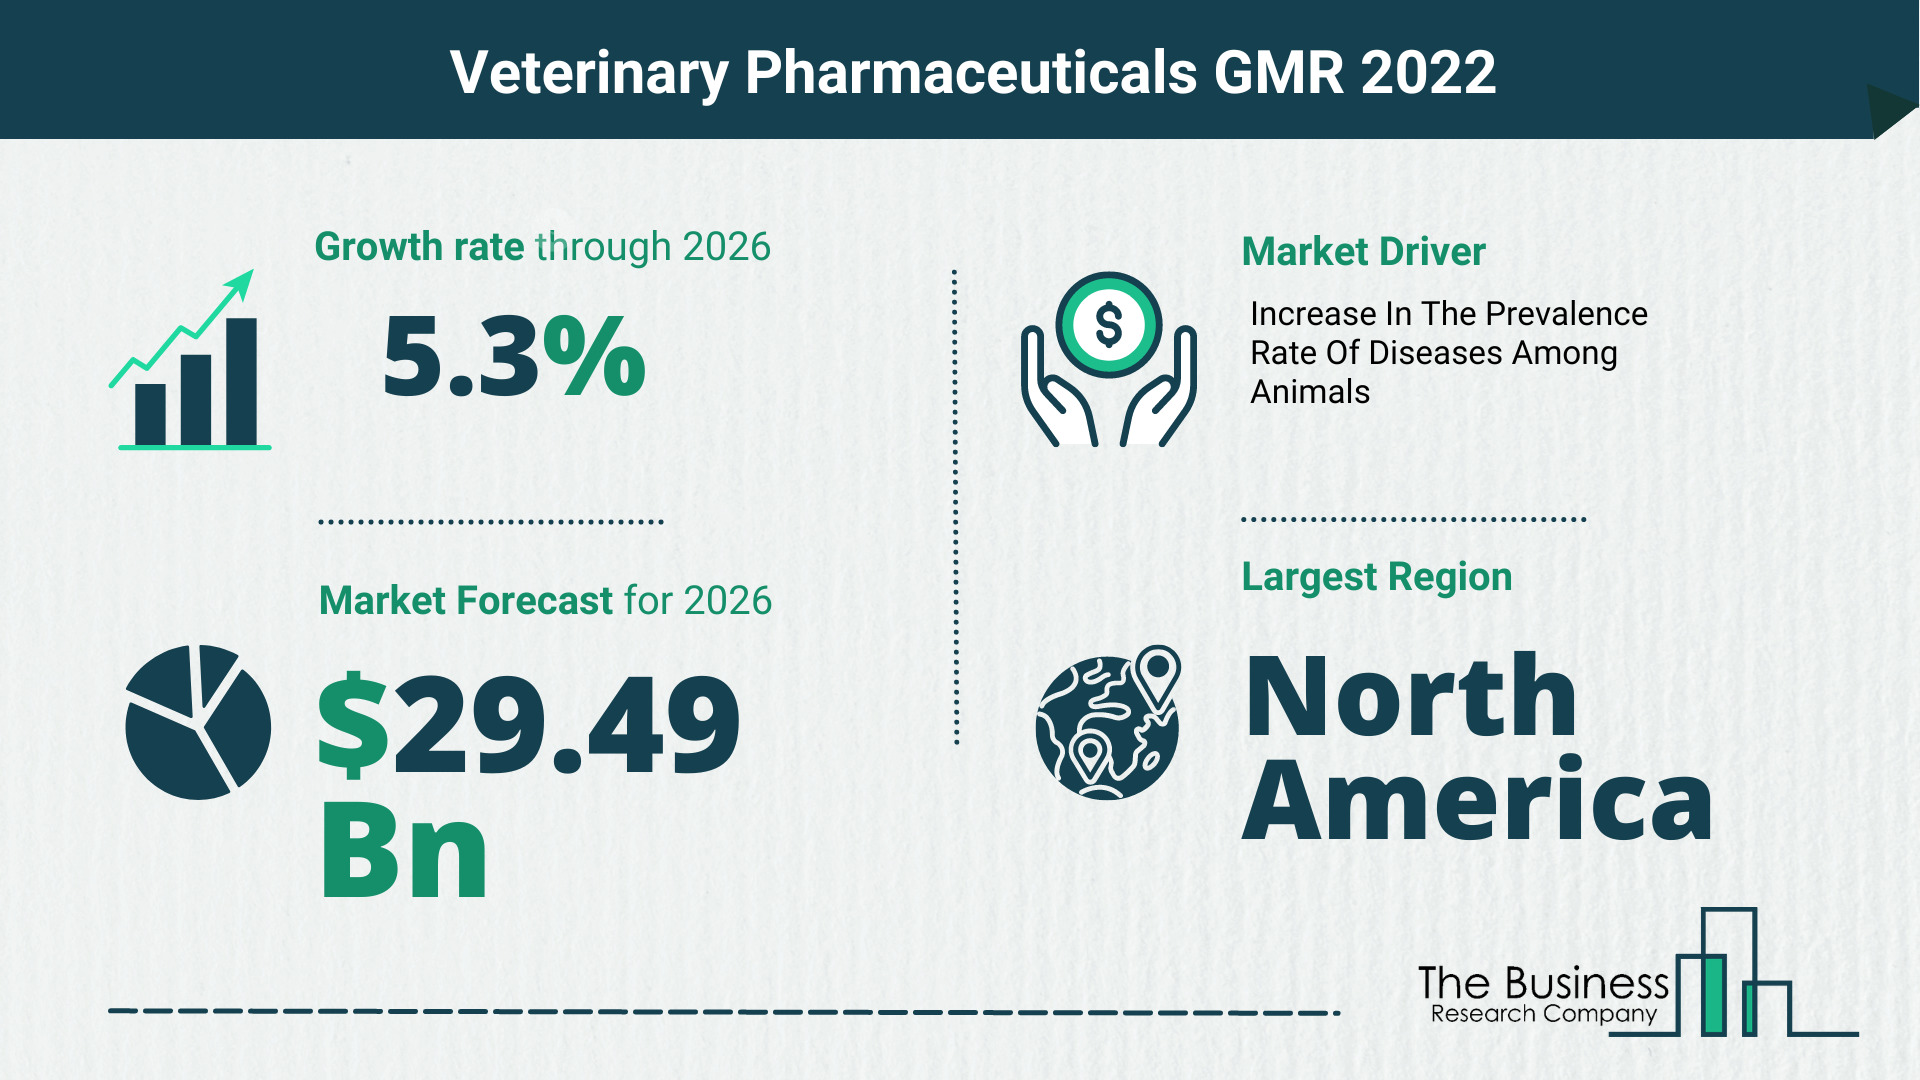 How Will The Veterinary Pharmaceuticals Market Grow In 2022?